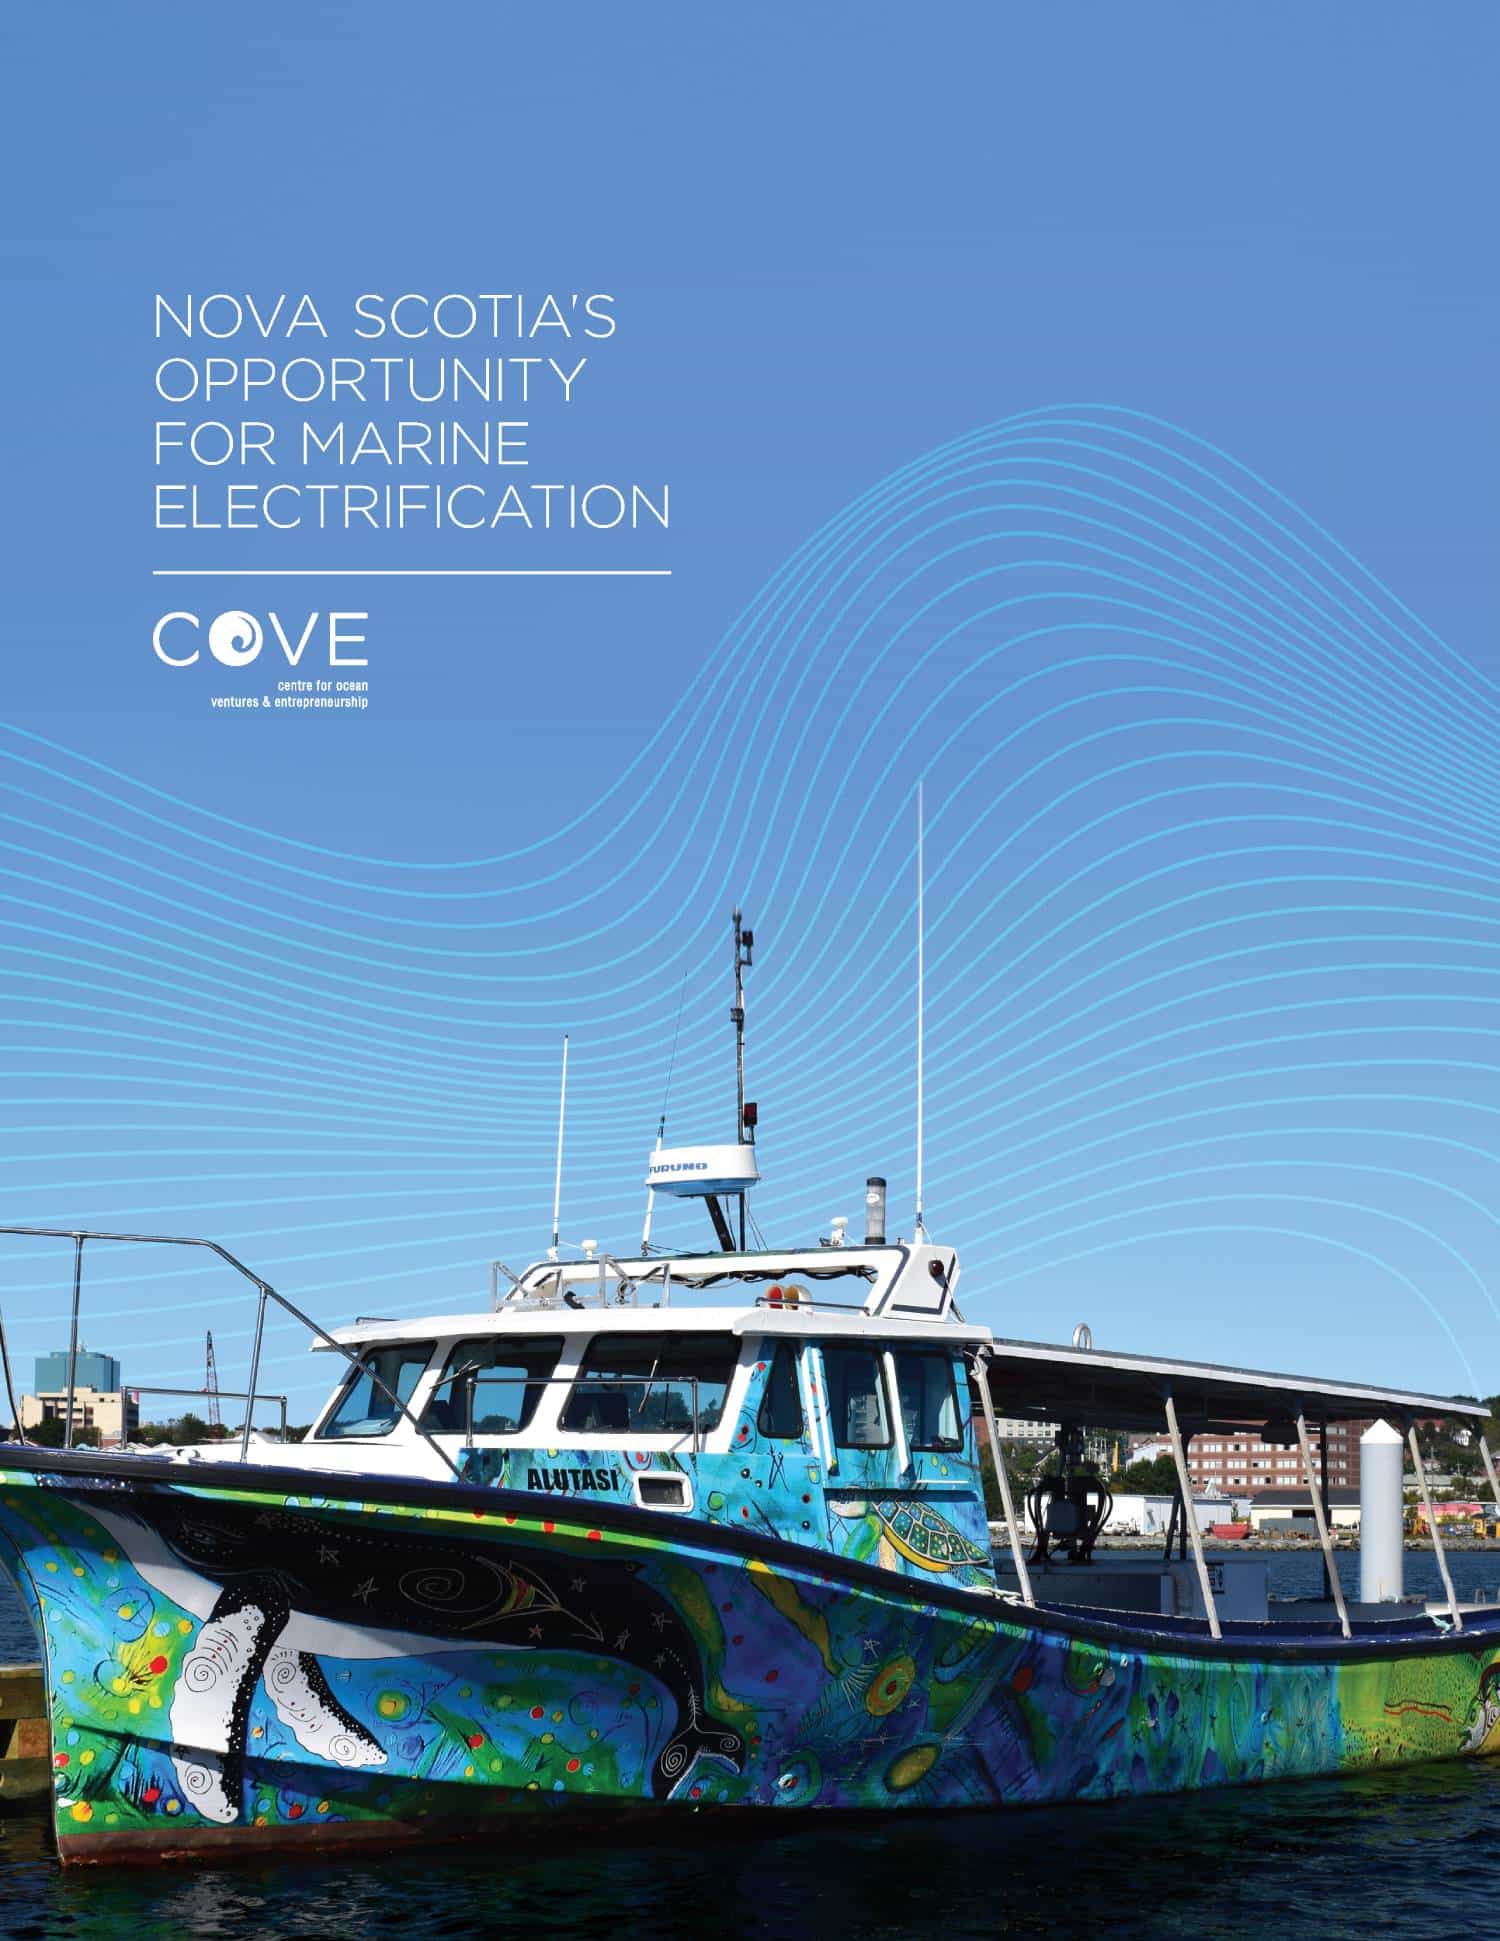 Nova Scotia primed to lead electrification of marine industry